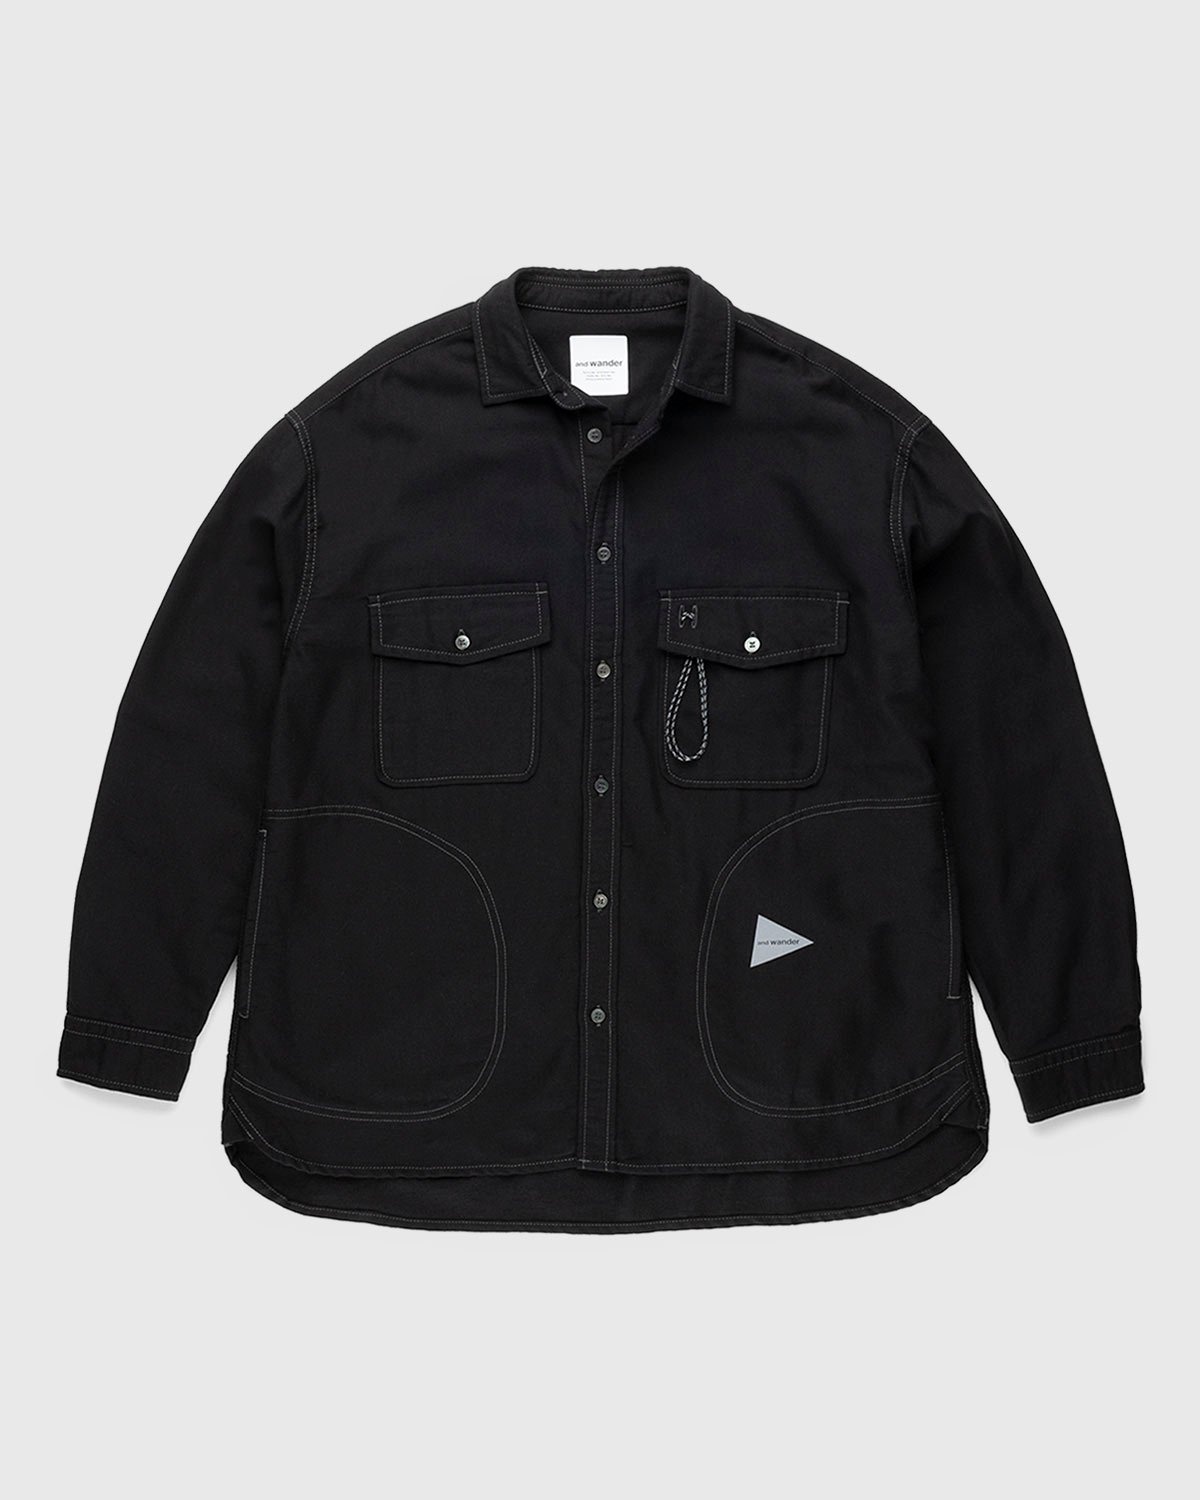 And Wander – Thermonel Pullover Shirt (M) Black - Overshirt - Black - Image 1